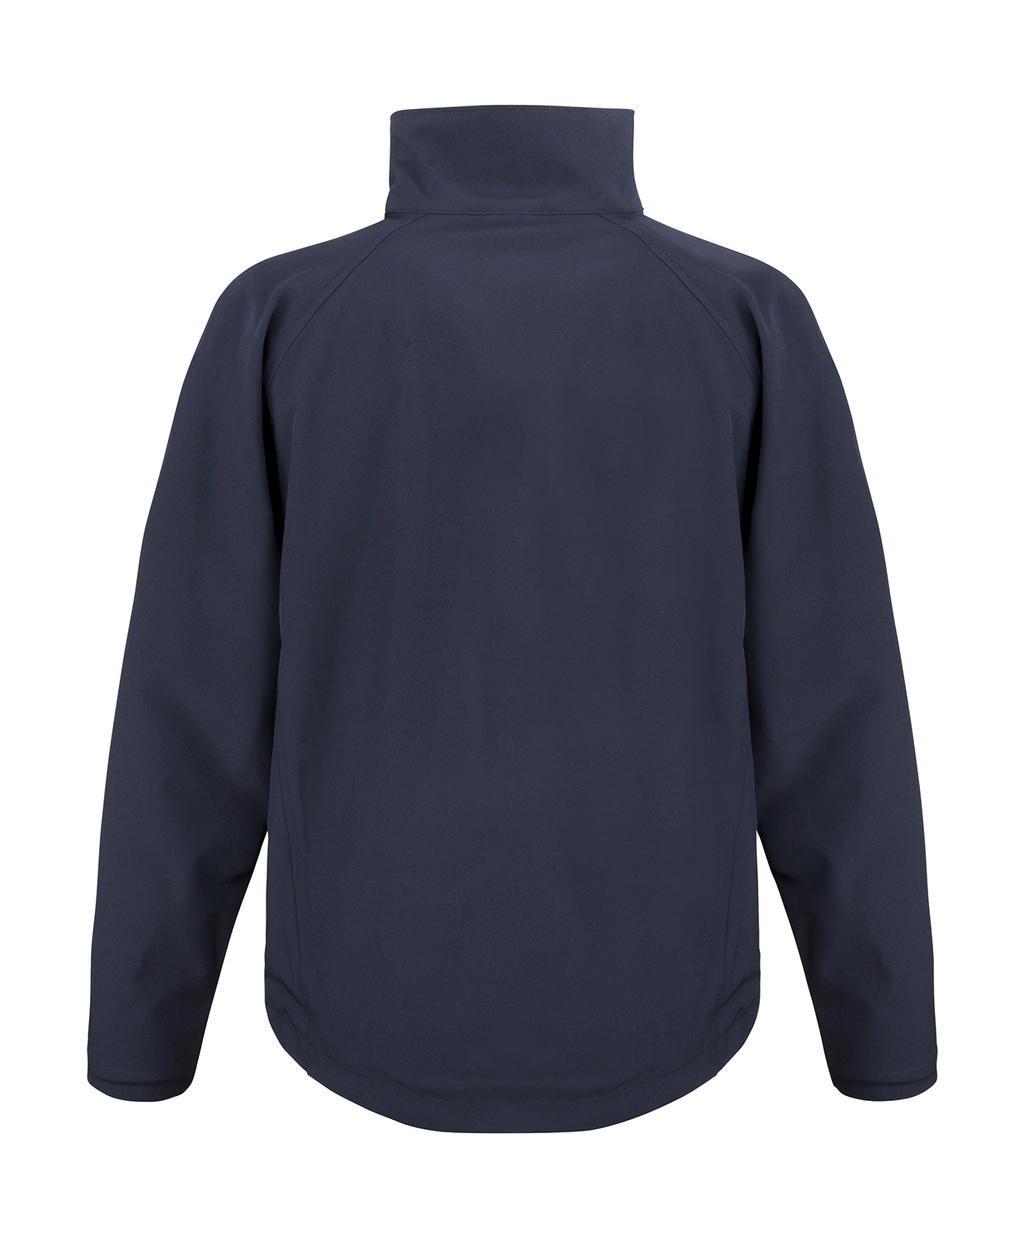  Base Layer Softshell in Farbe Black